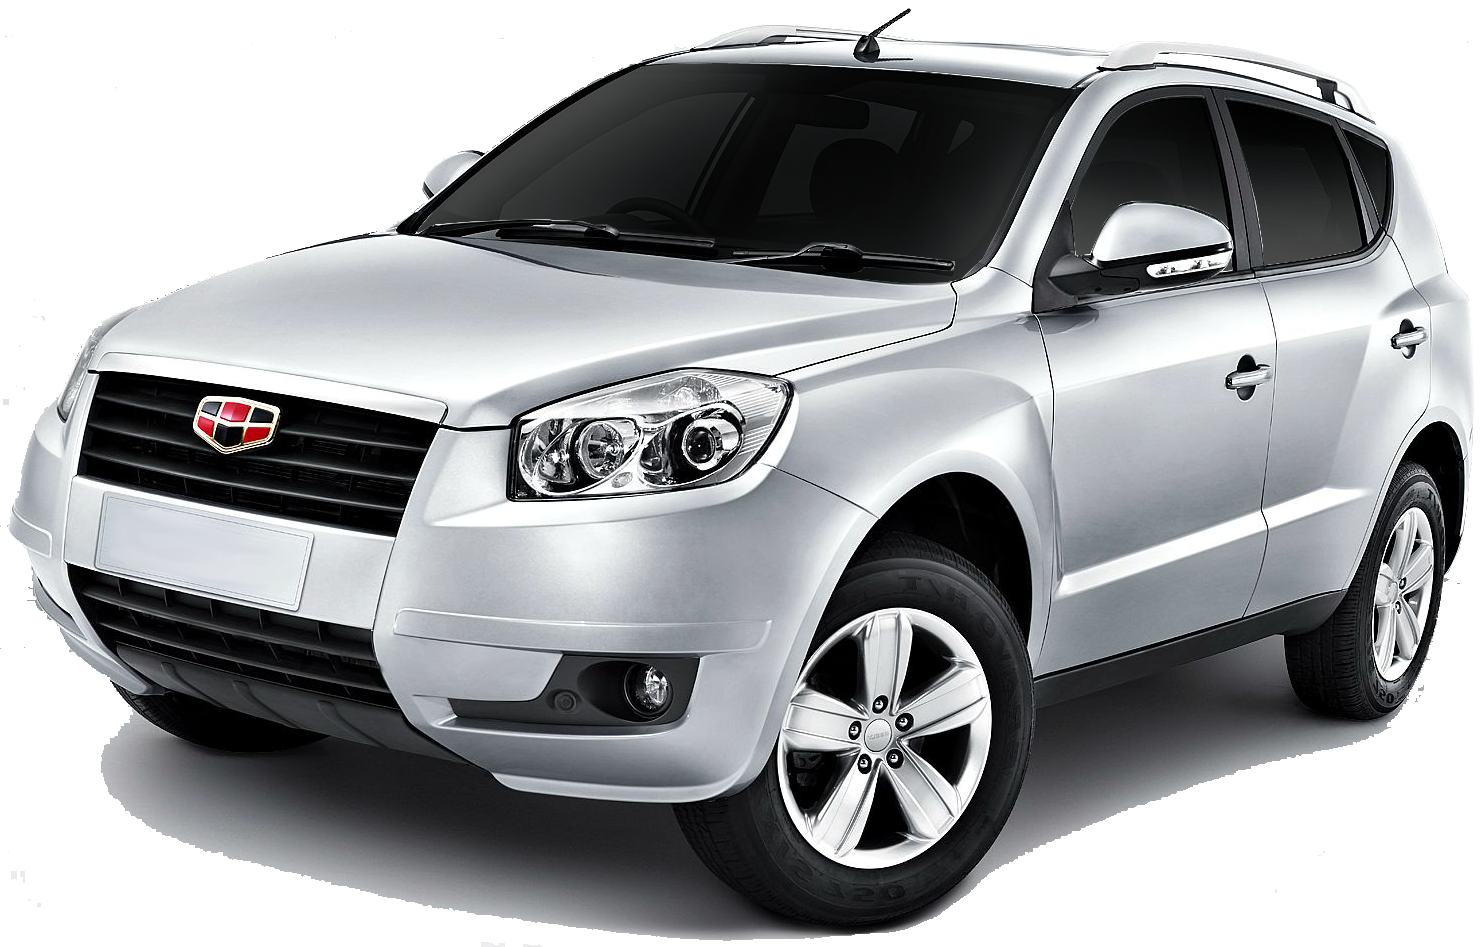 Geely Emgrand x7. Geely Emgrand x7 2016. Автомобиль Geely Emgrand x7. Geely Emgrand x7 2013.